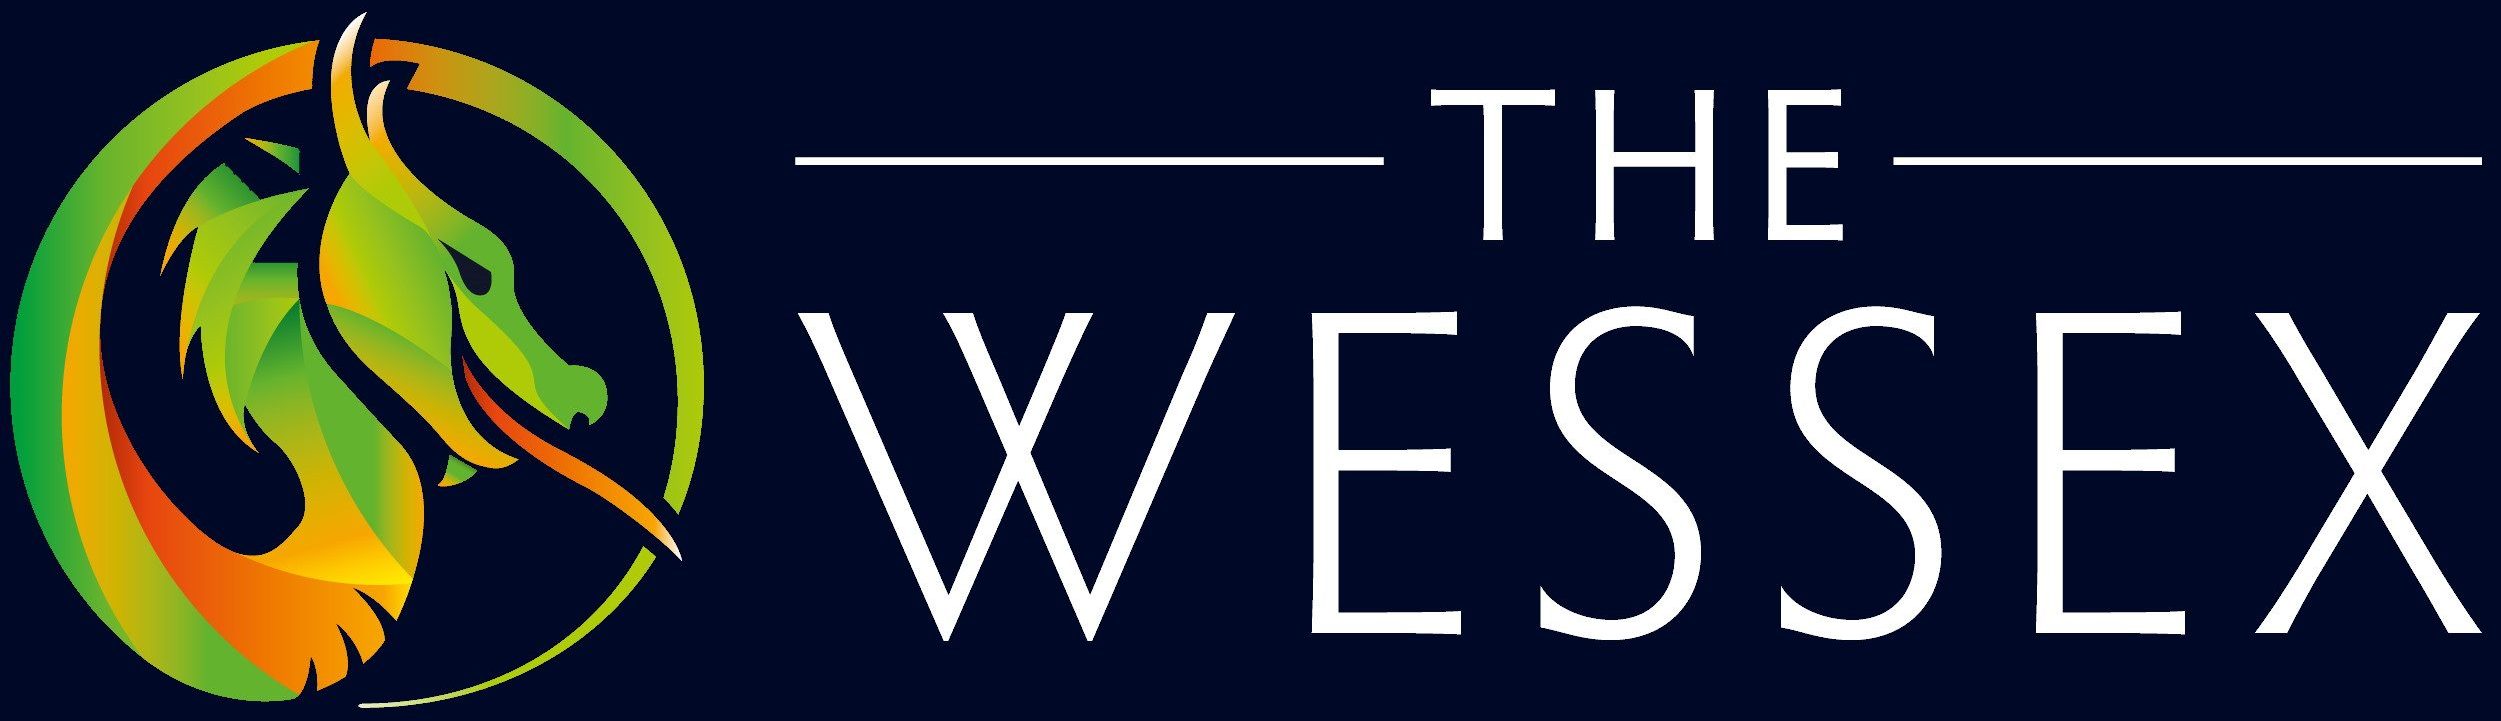 The Wessex